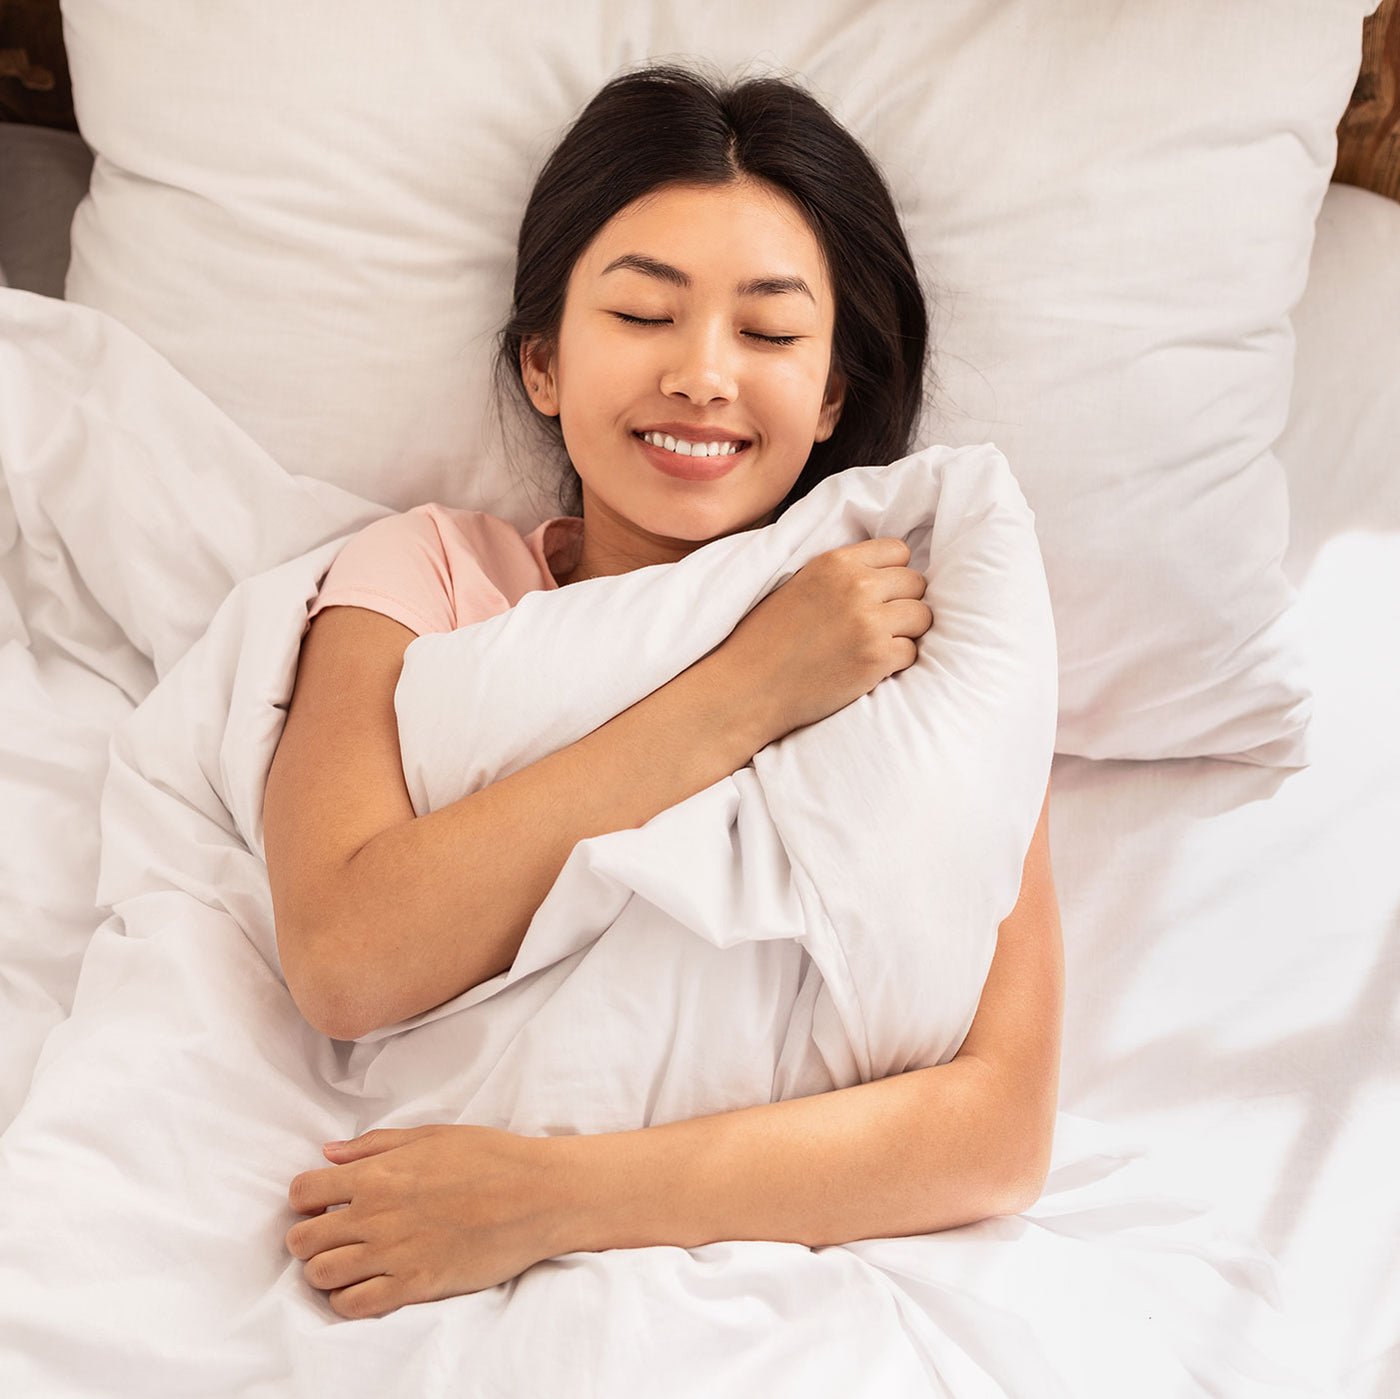 Image of a woman asleep in bed holding her white duvet against her